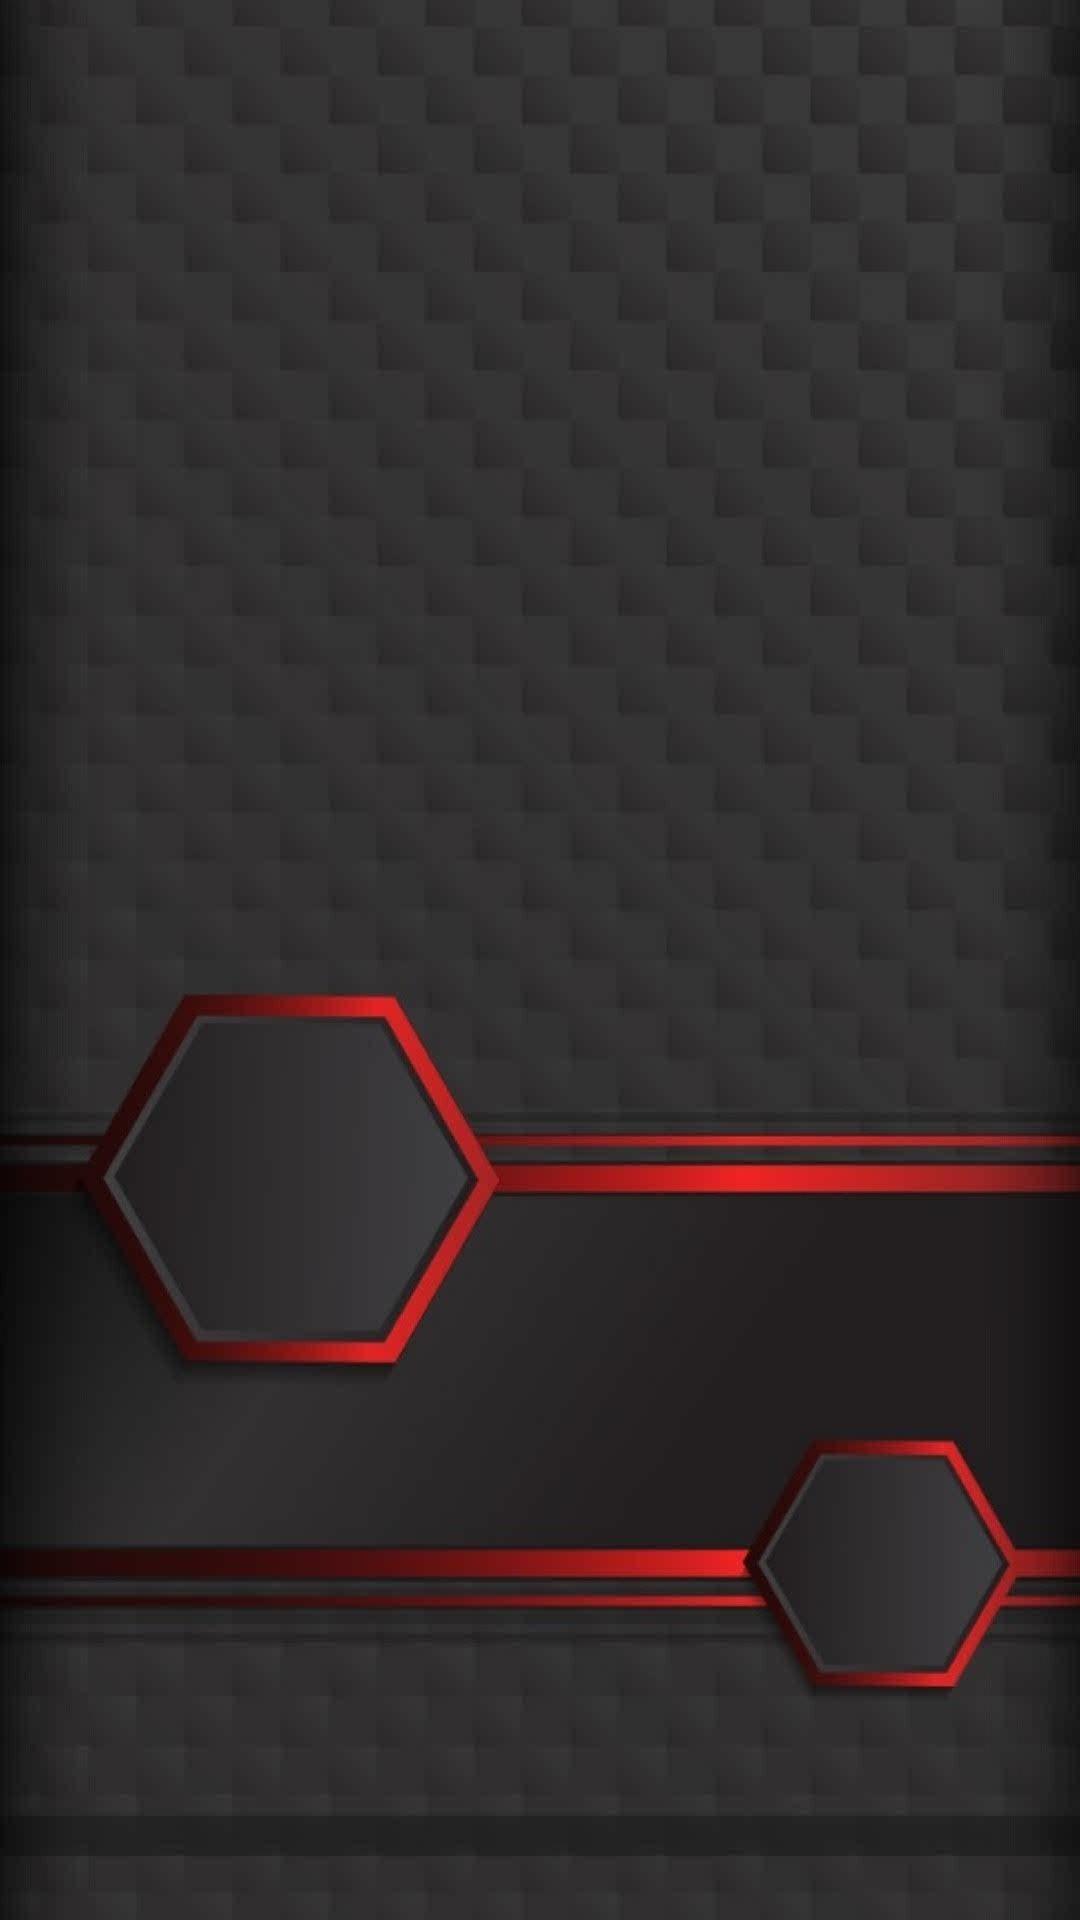 hexagons. Huawei wallpaper, Android